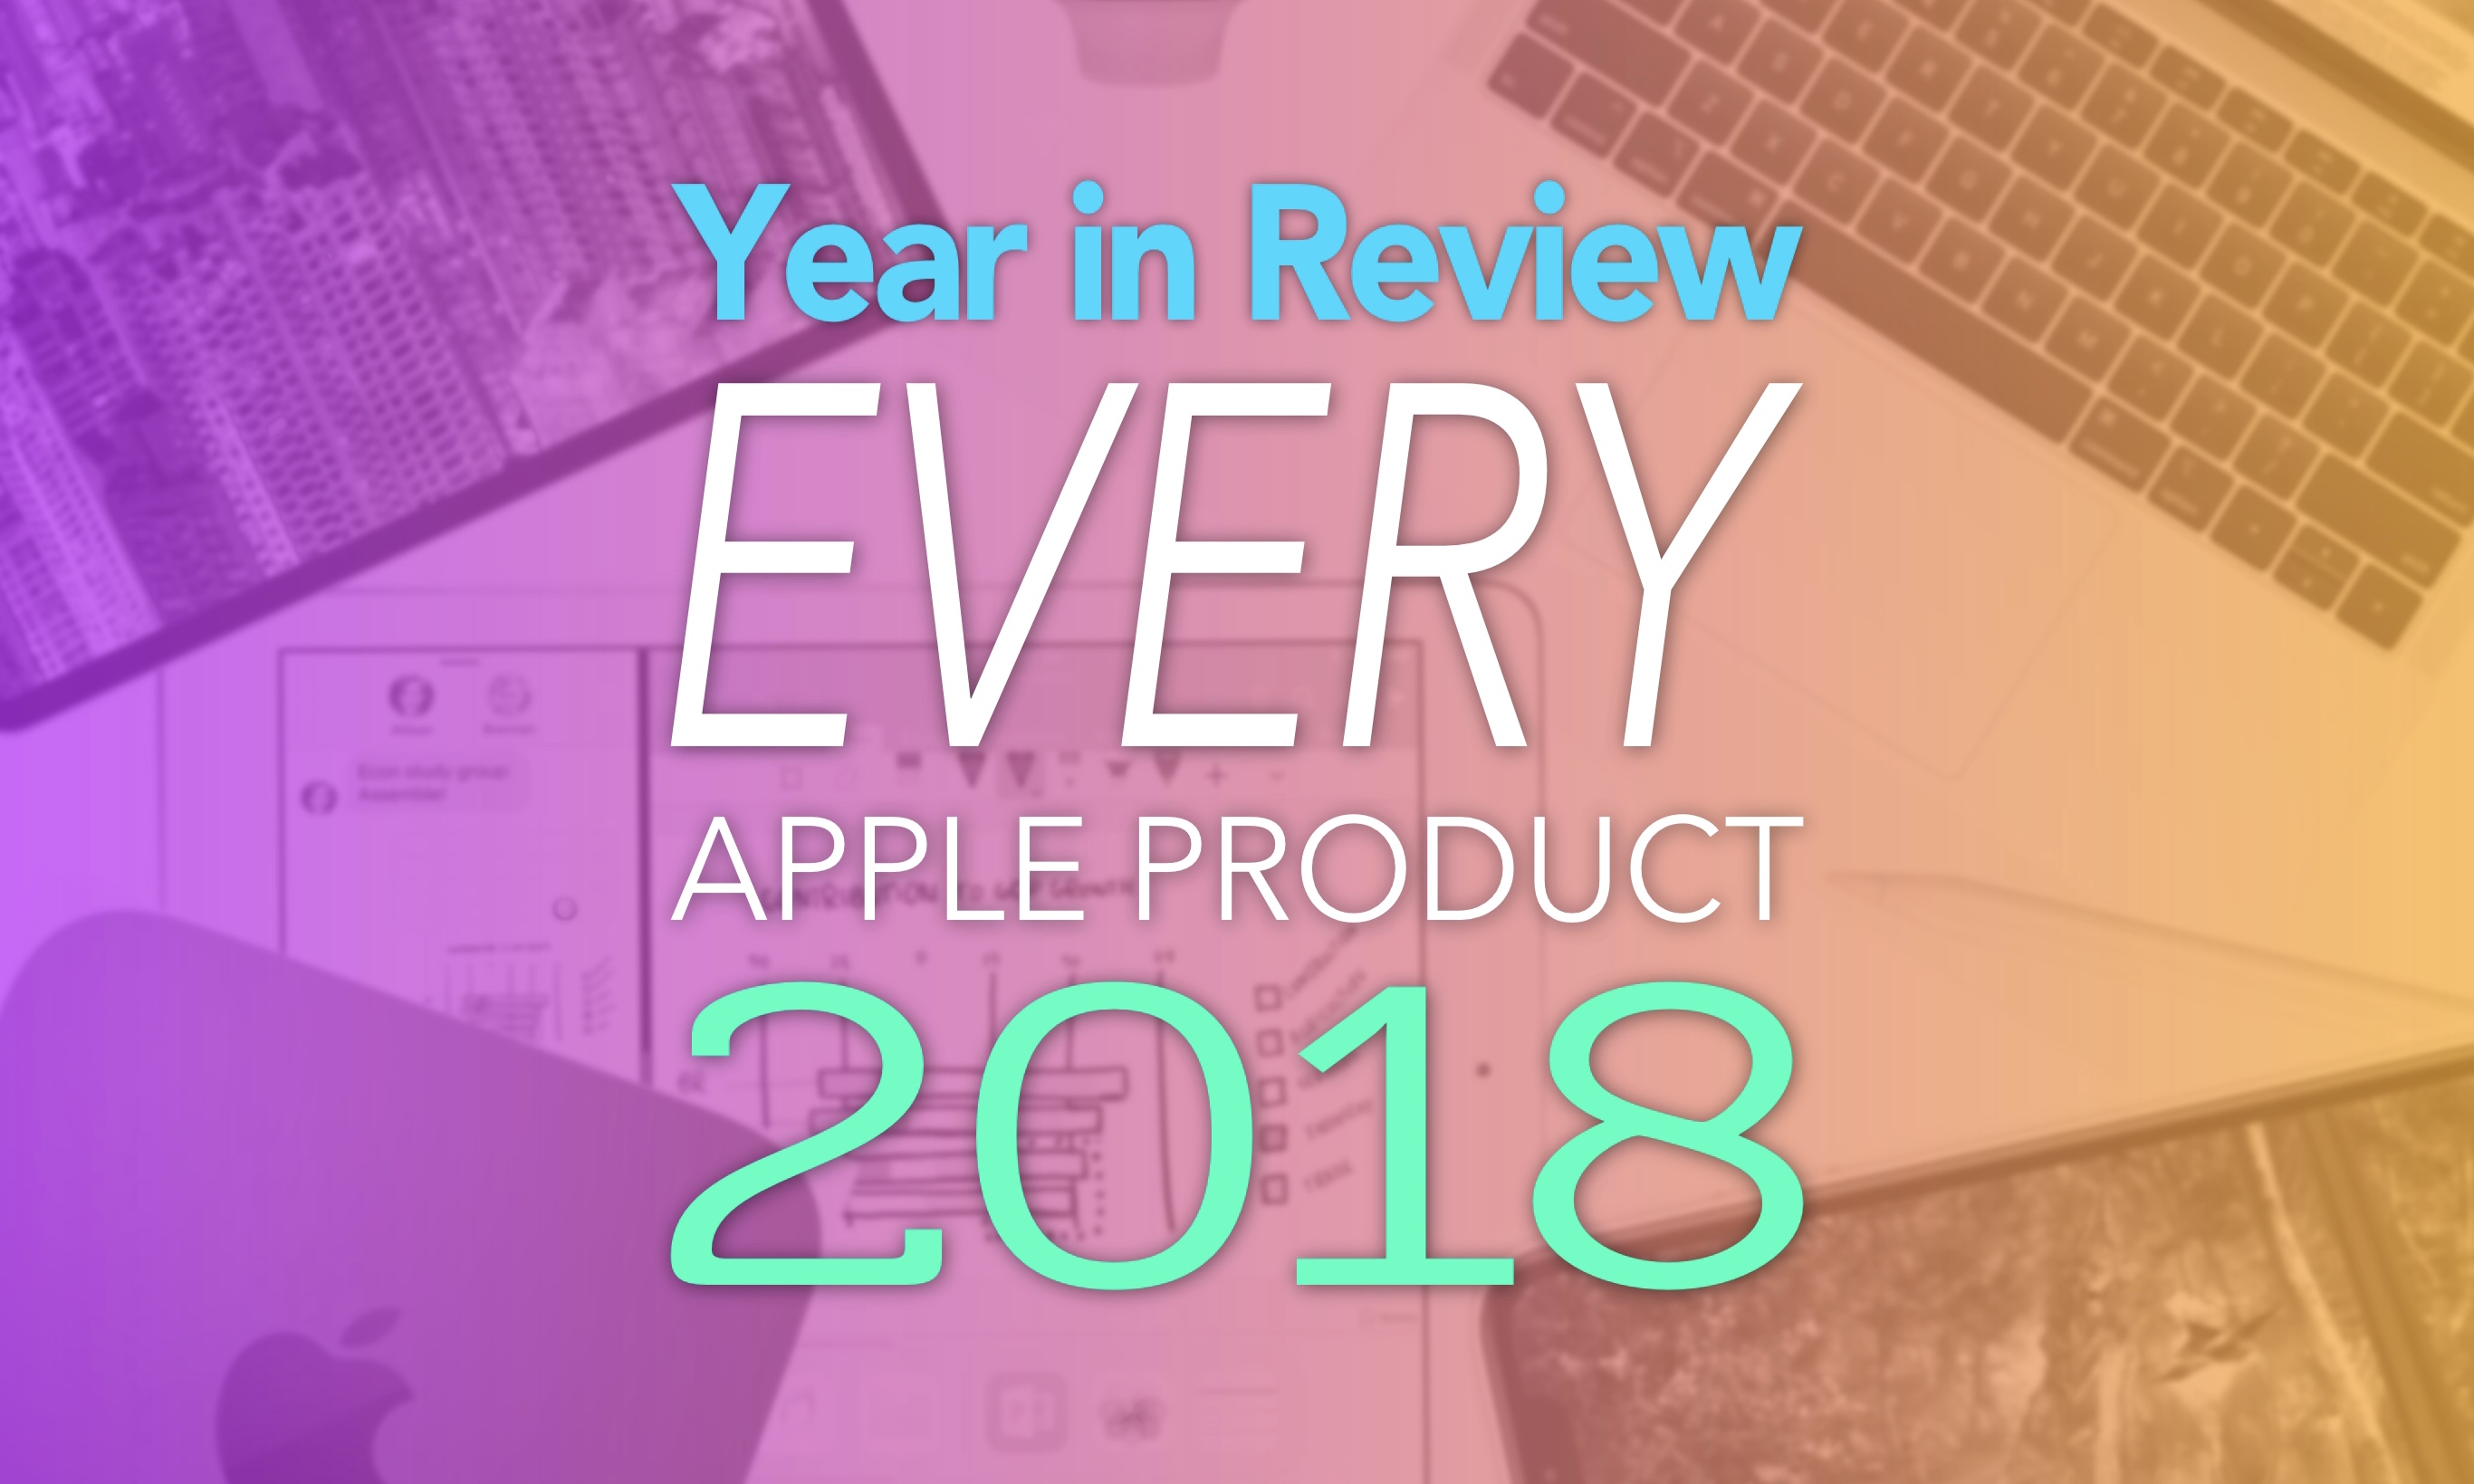 Year in Review Every Apple Product 2018